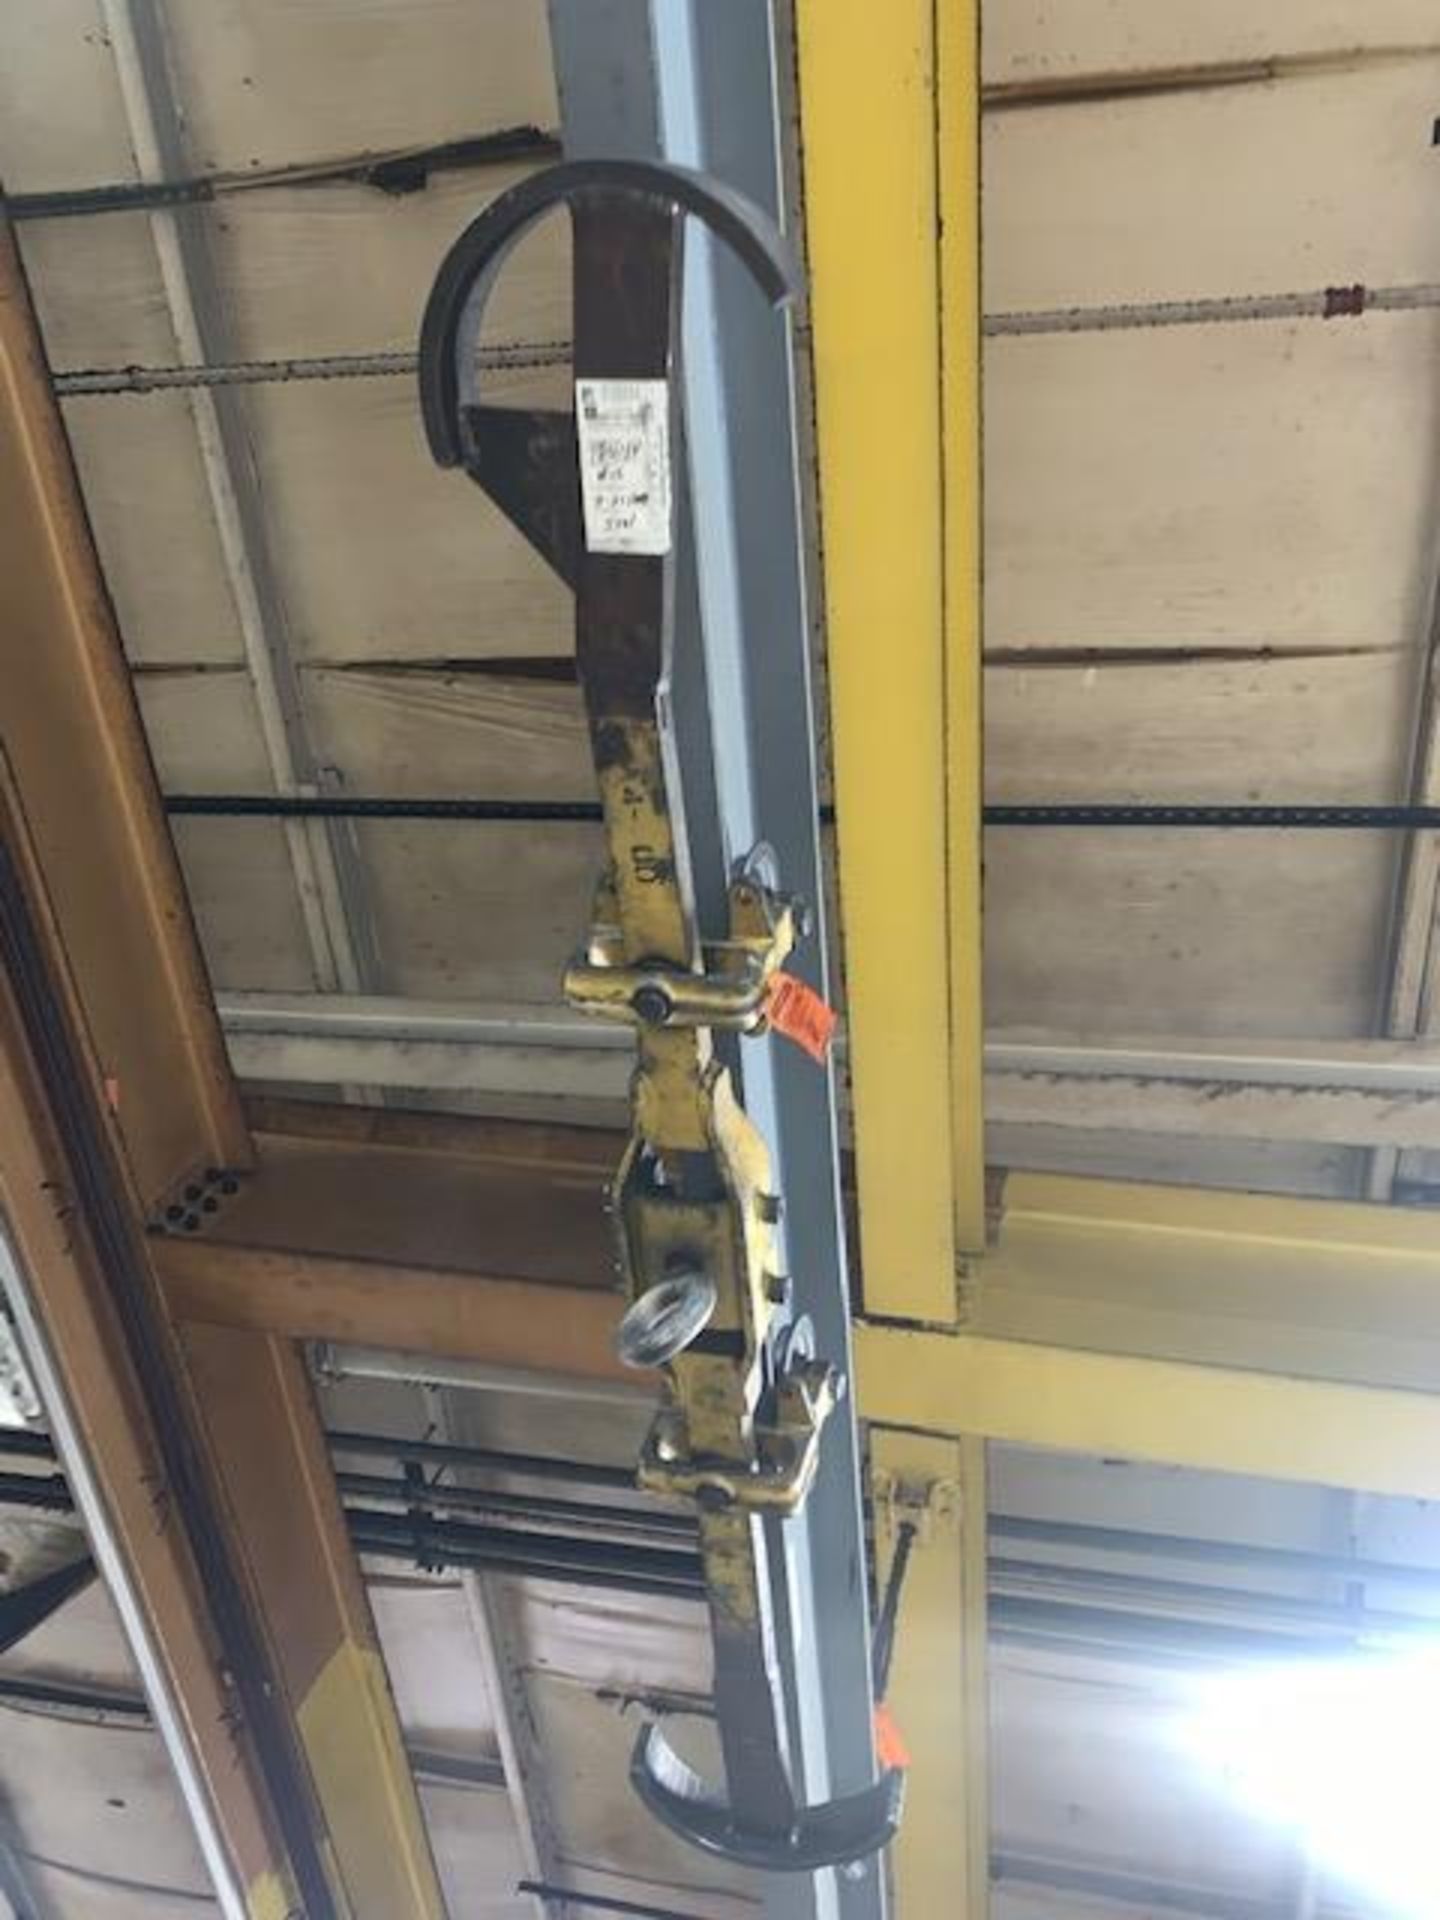 1 Ton Monorail Manual Trolleys, w/ Eye Bolt for hanging your items - Image 4 of 8